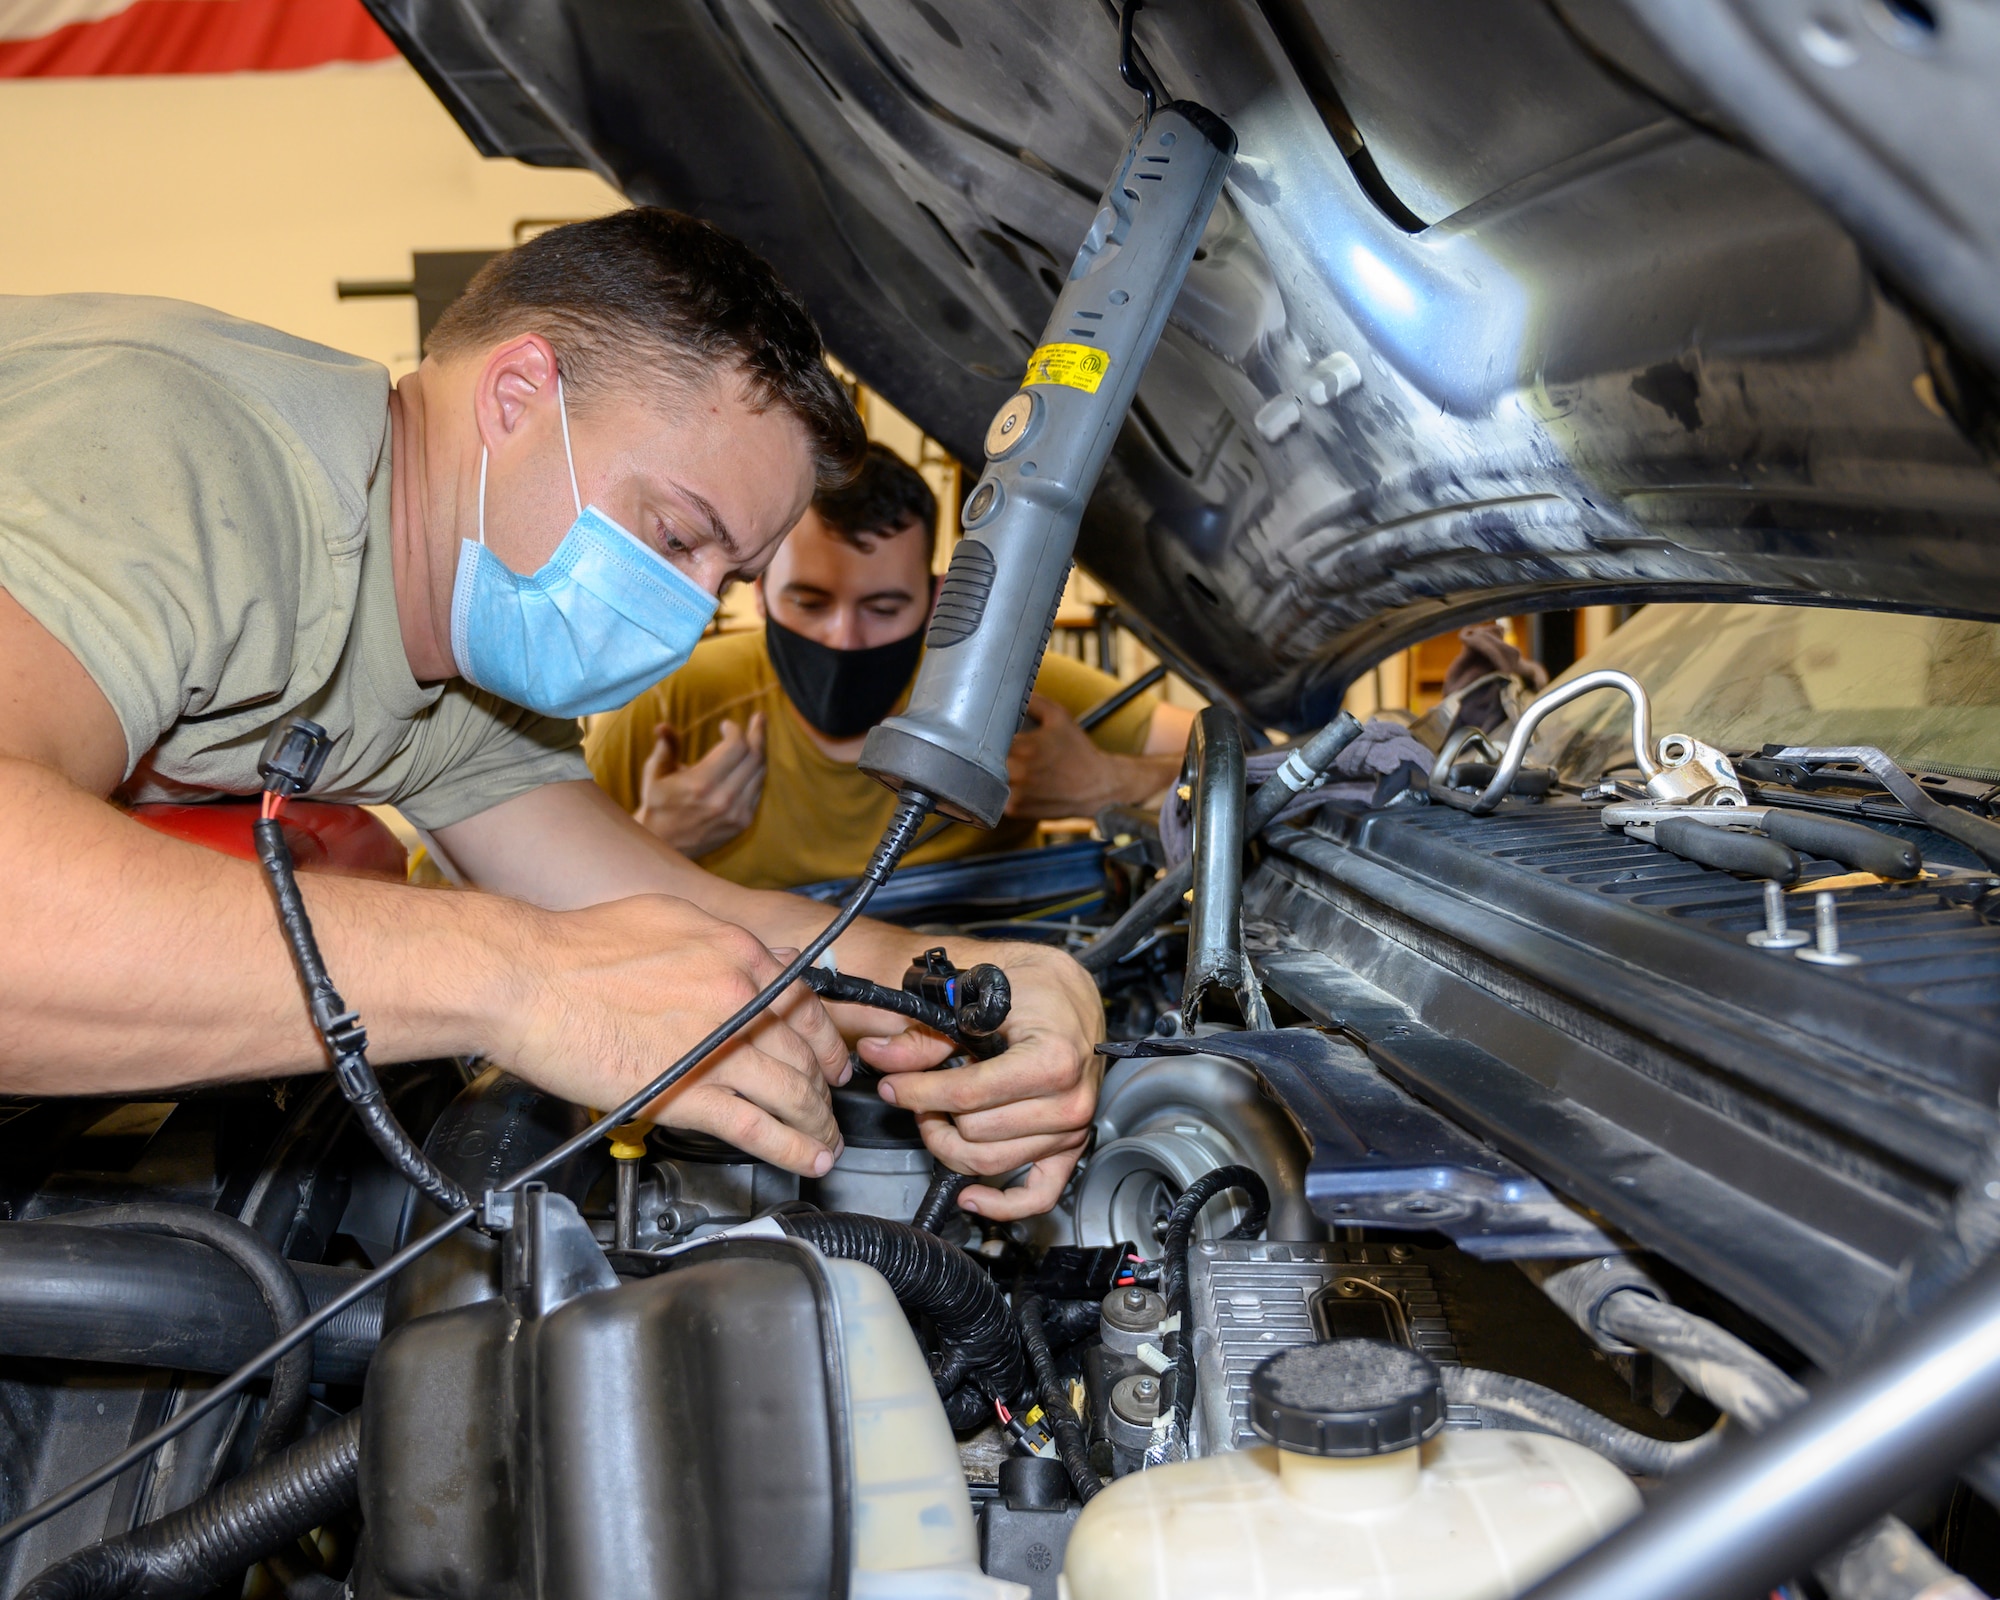 Two Airmen inspect wiring in an engine as part of routine and preventative maintenance.